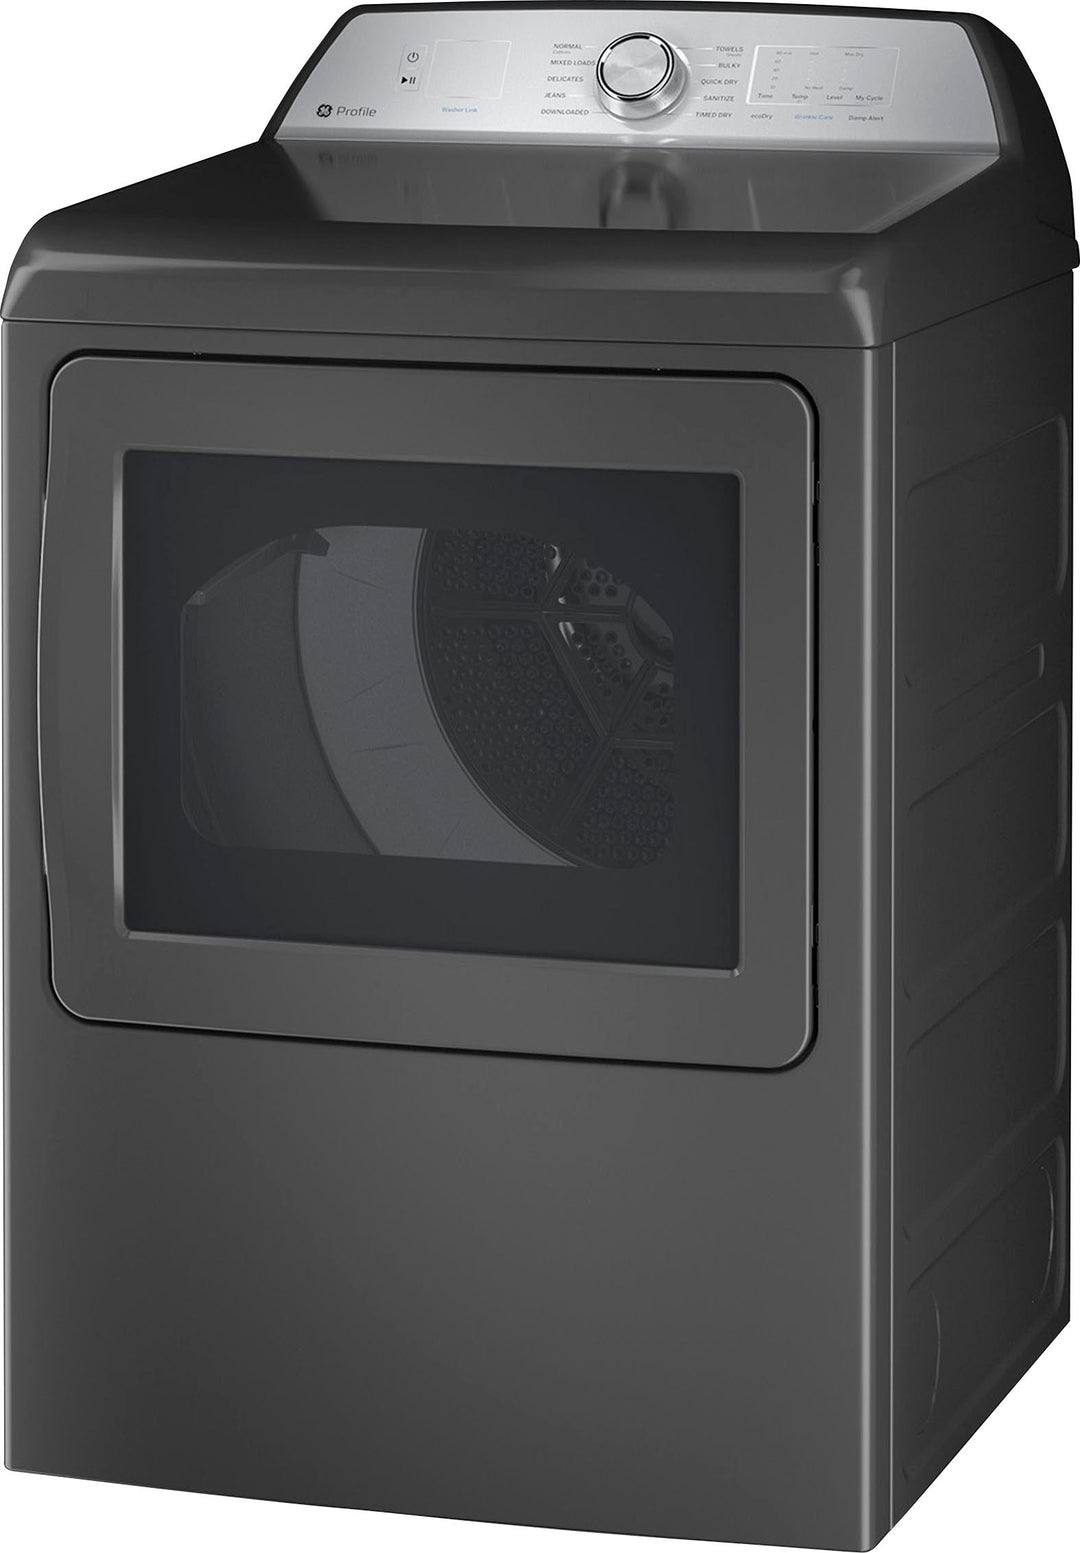 GE Profile - 7.4 Cu. Ft. Smart Gas Dryer with Sanitize Cycle and Sensor Dry - Diamond gray_5